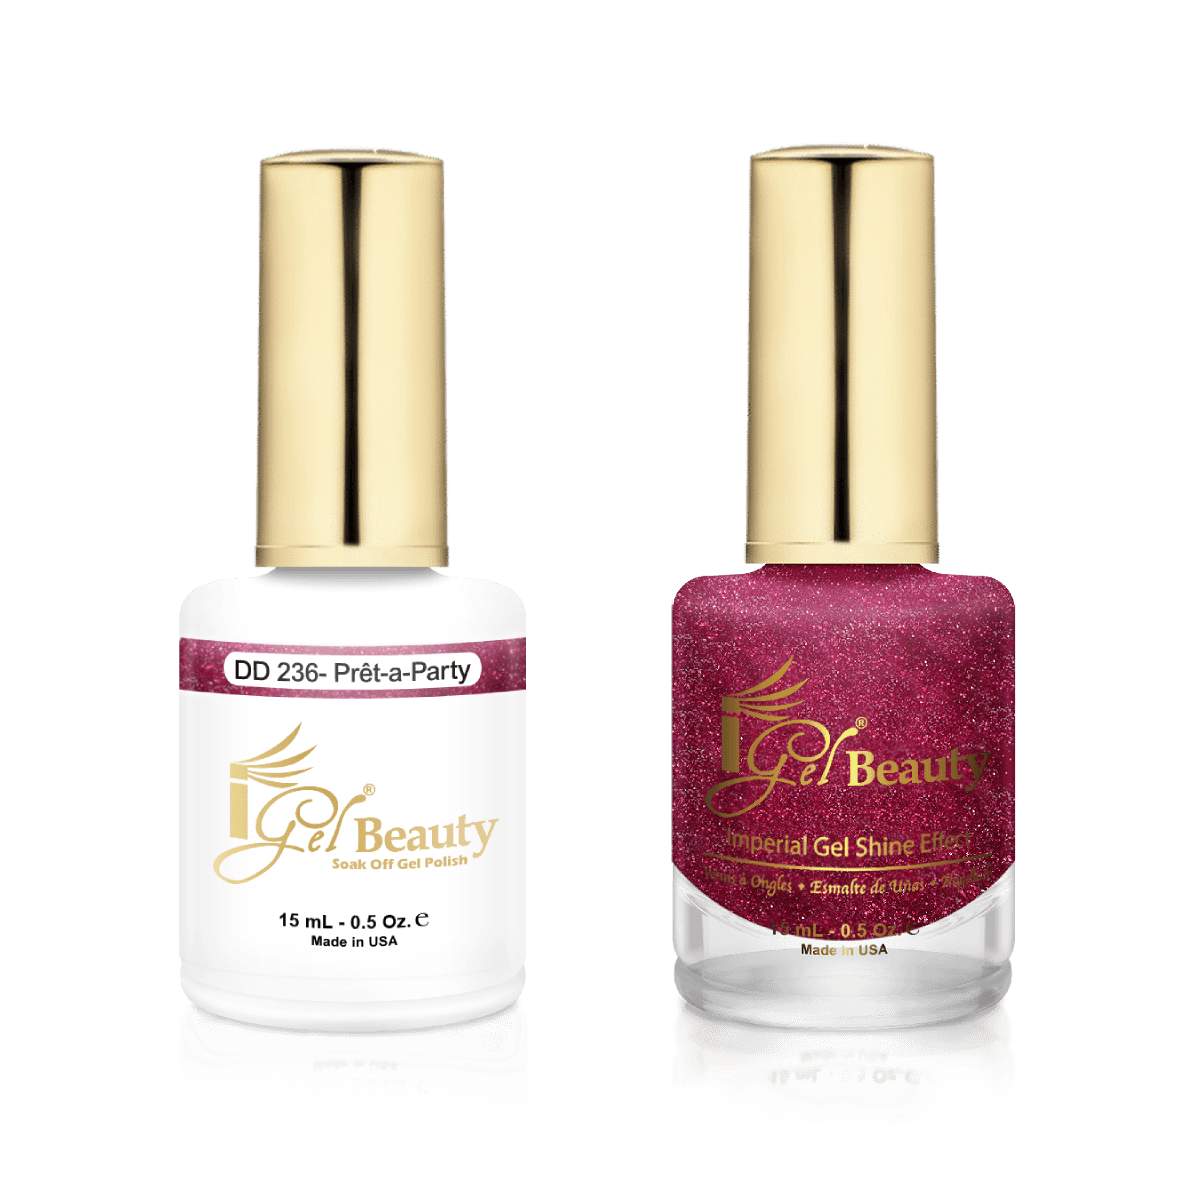 IGel Duo Gel Polish + Matching Nail Lacquer DD 236 PRET-A-PARTY